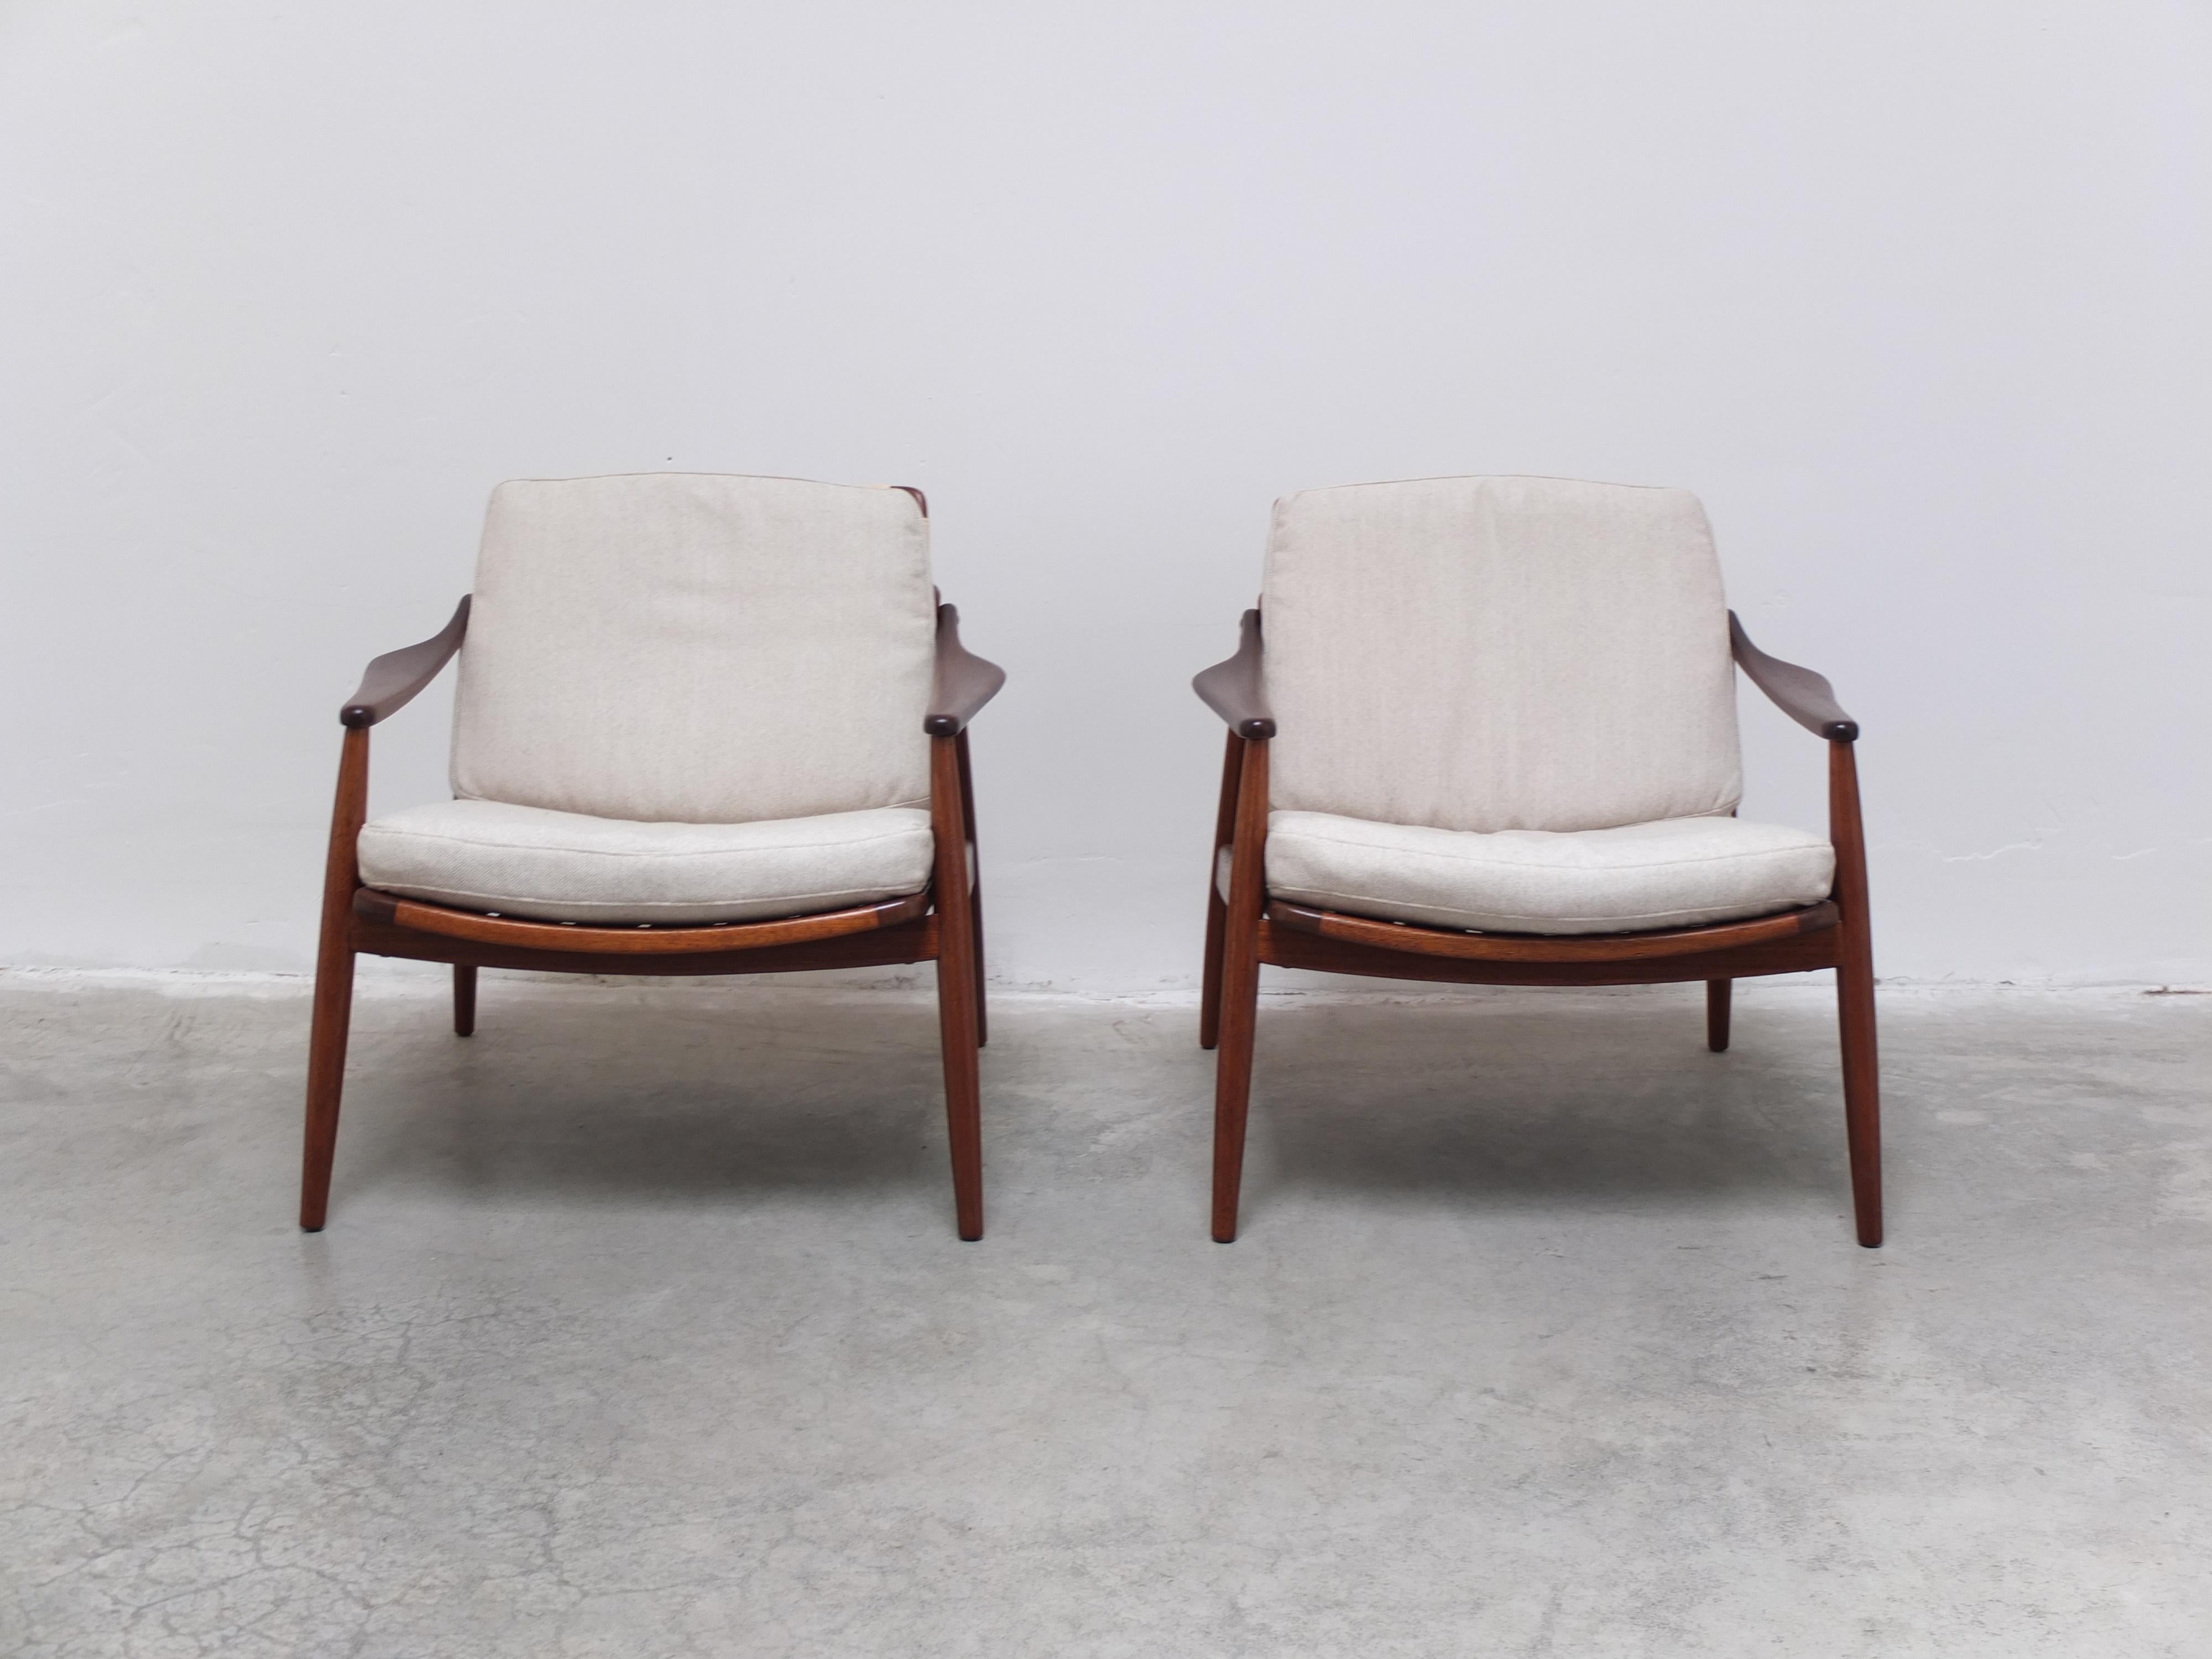 Wool Pair of 'Model 400' Easy Chairs by Hartmut Lohmeyer for Wilkhahn, 1956 For Sale